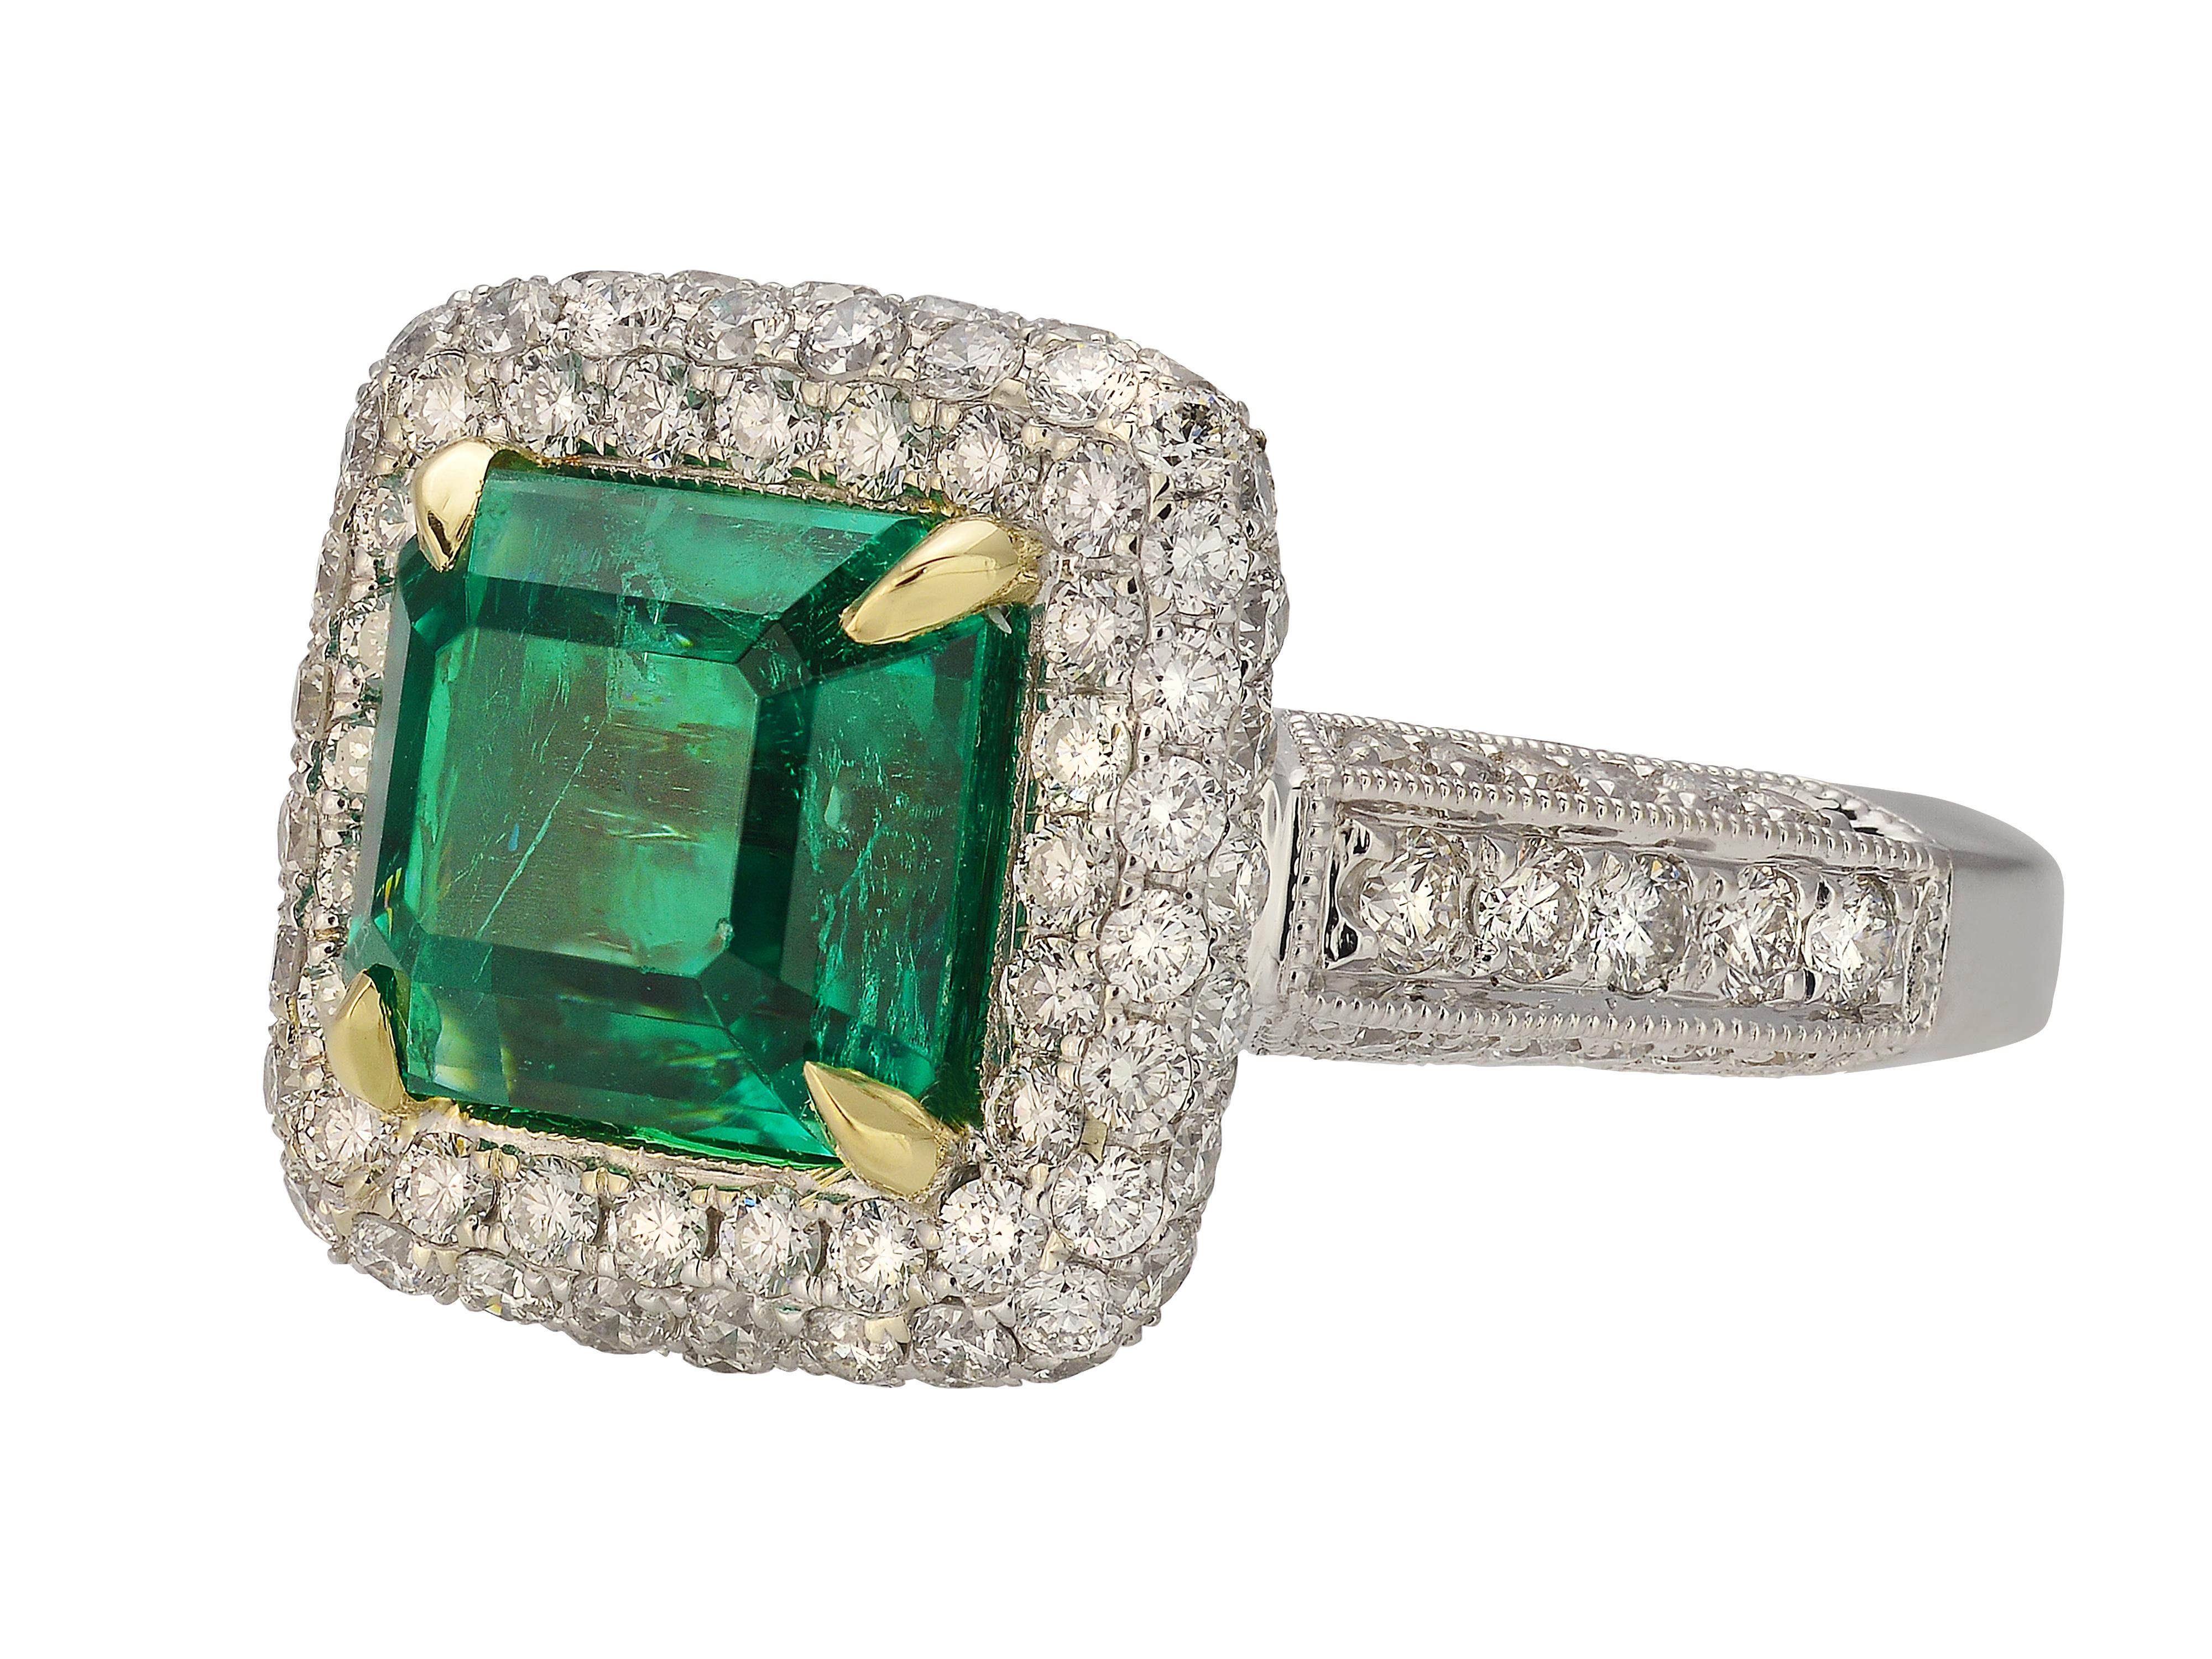 18 Karat White & Yellow Gold Emerald Ring Featuring A 3.13 Carat Octagonal Step Cut Emerald GIA Graded As Colombian In Origin. The Emerald Is Surrounded By 146 Round Brilliant Cut Diamonds Of VS Clarity & G Color Totaling 1.91 Carats. Finger Size